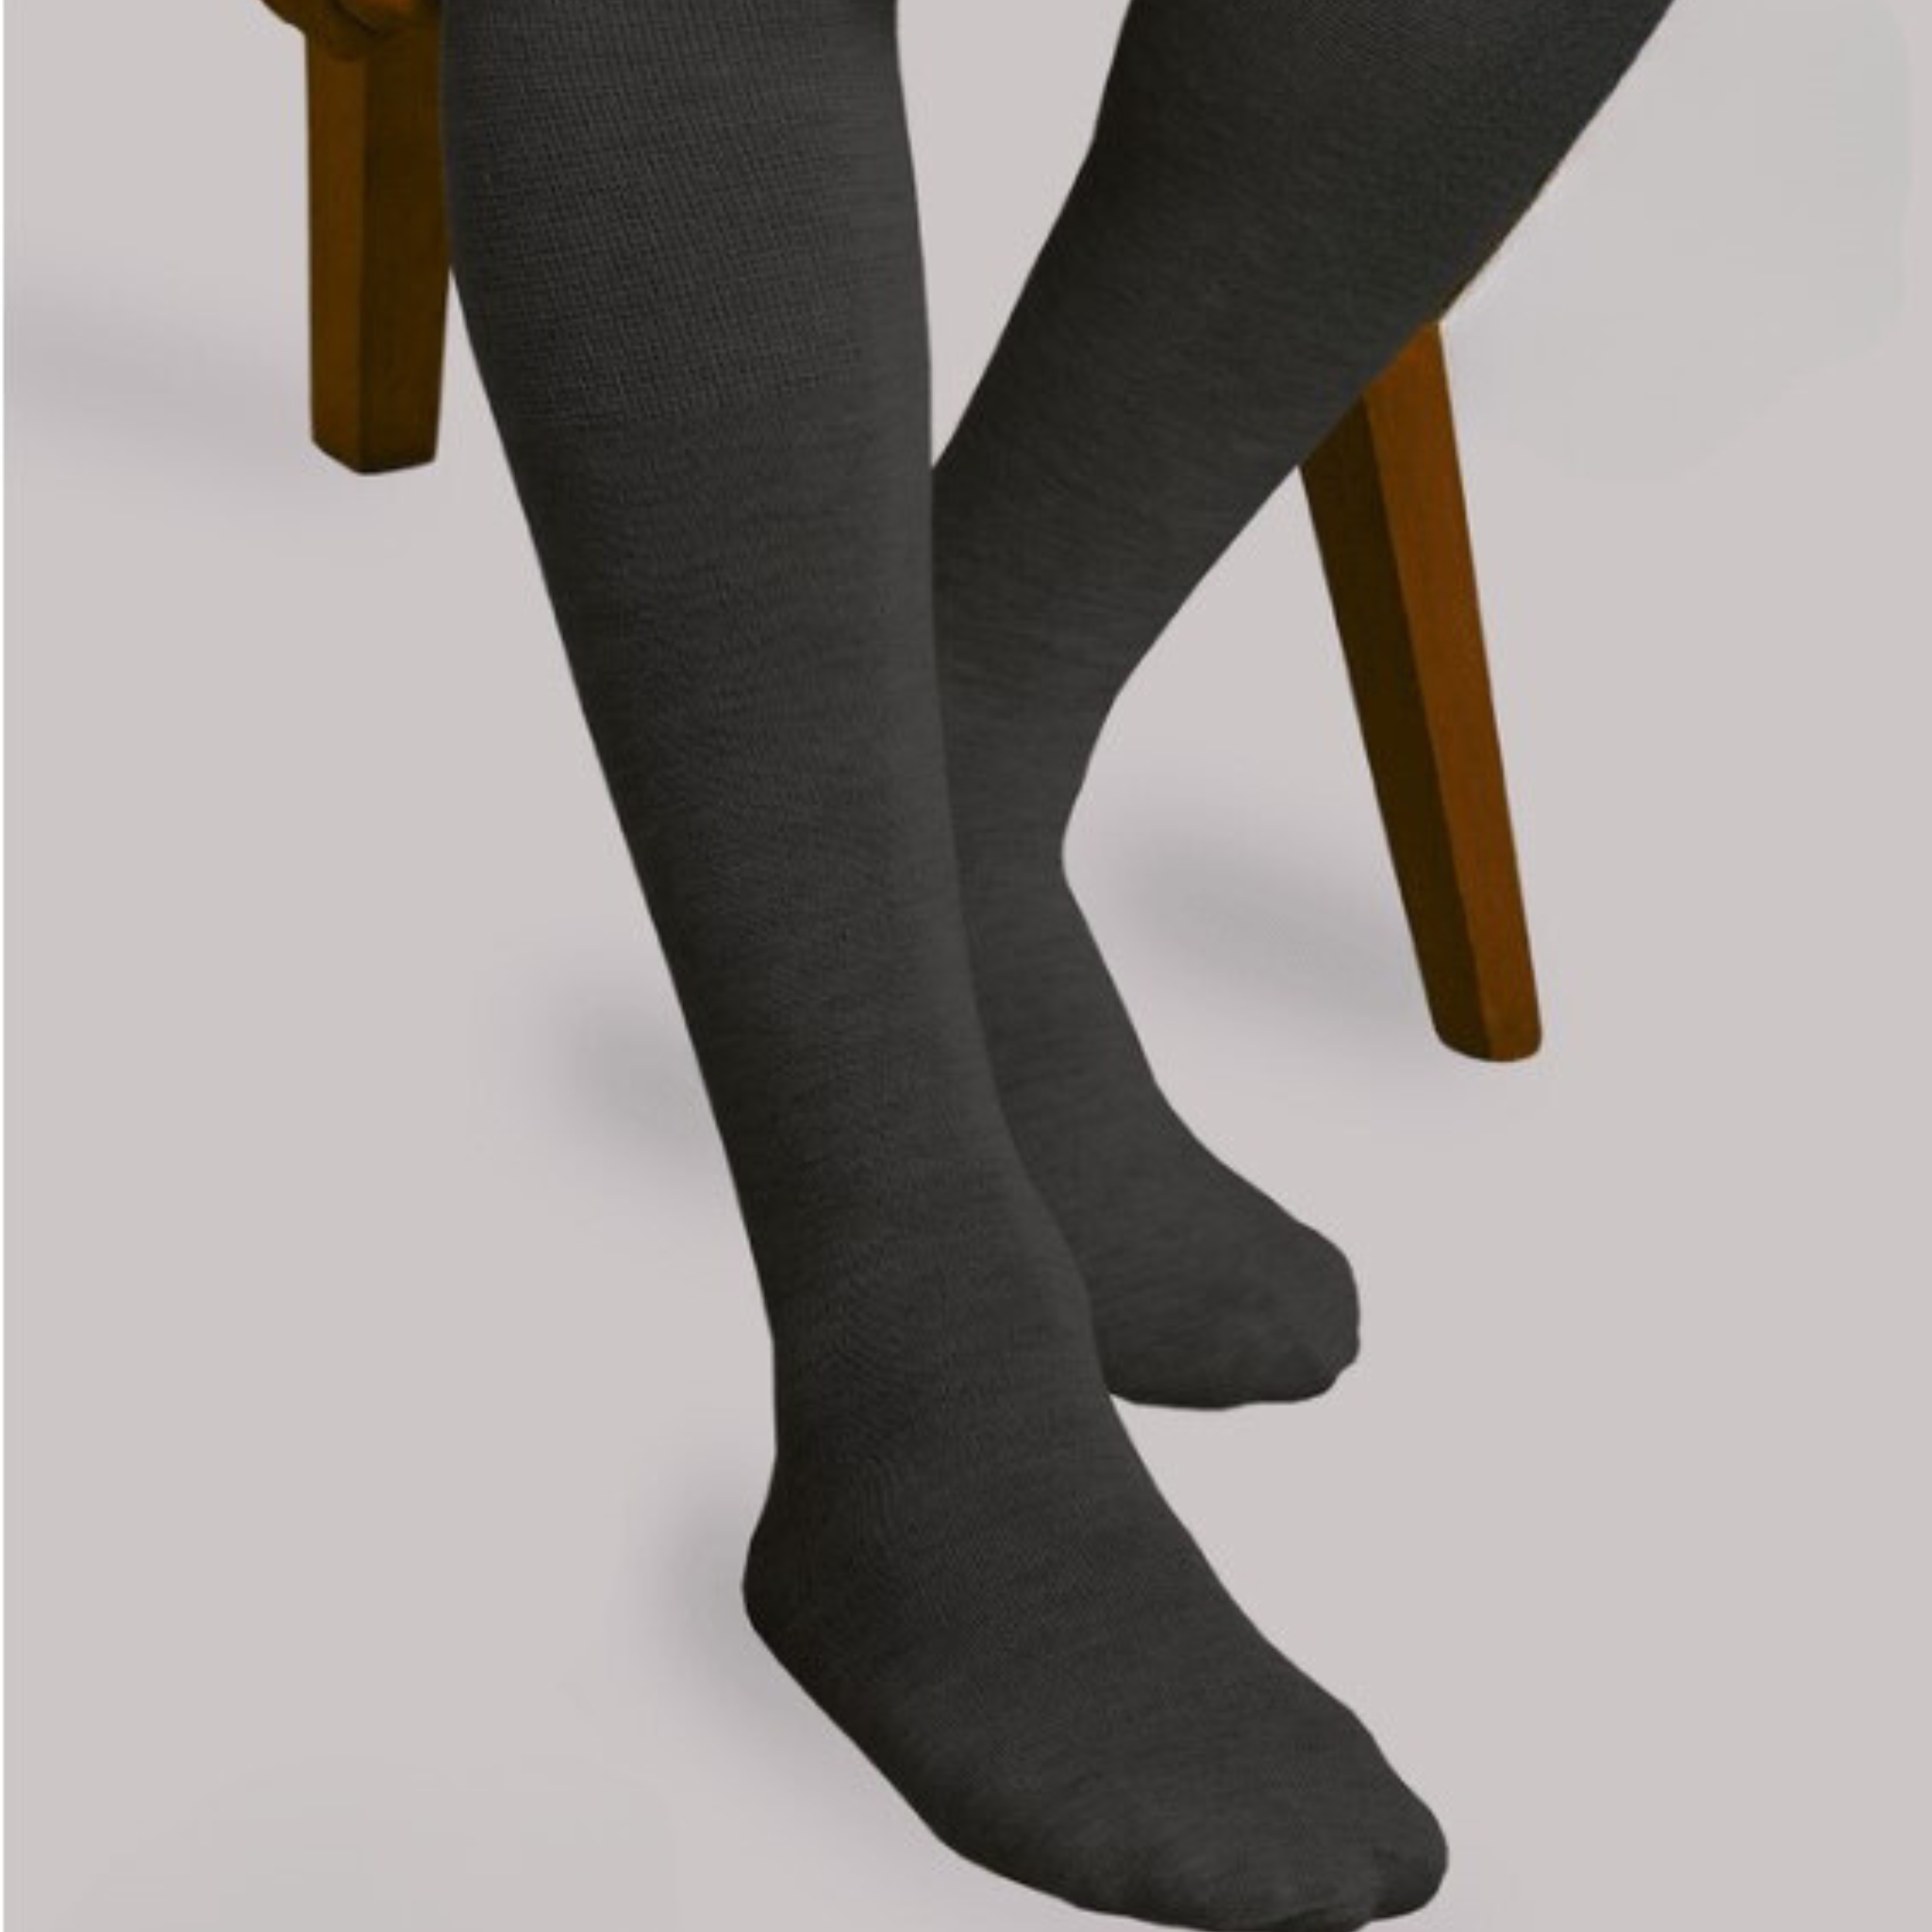 Knitrite - KAFO Extra Long Interface Sock for Adults - sold as single sock